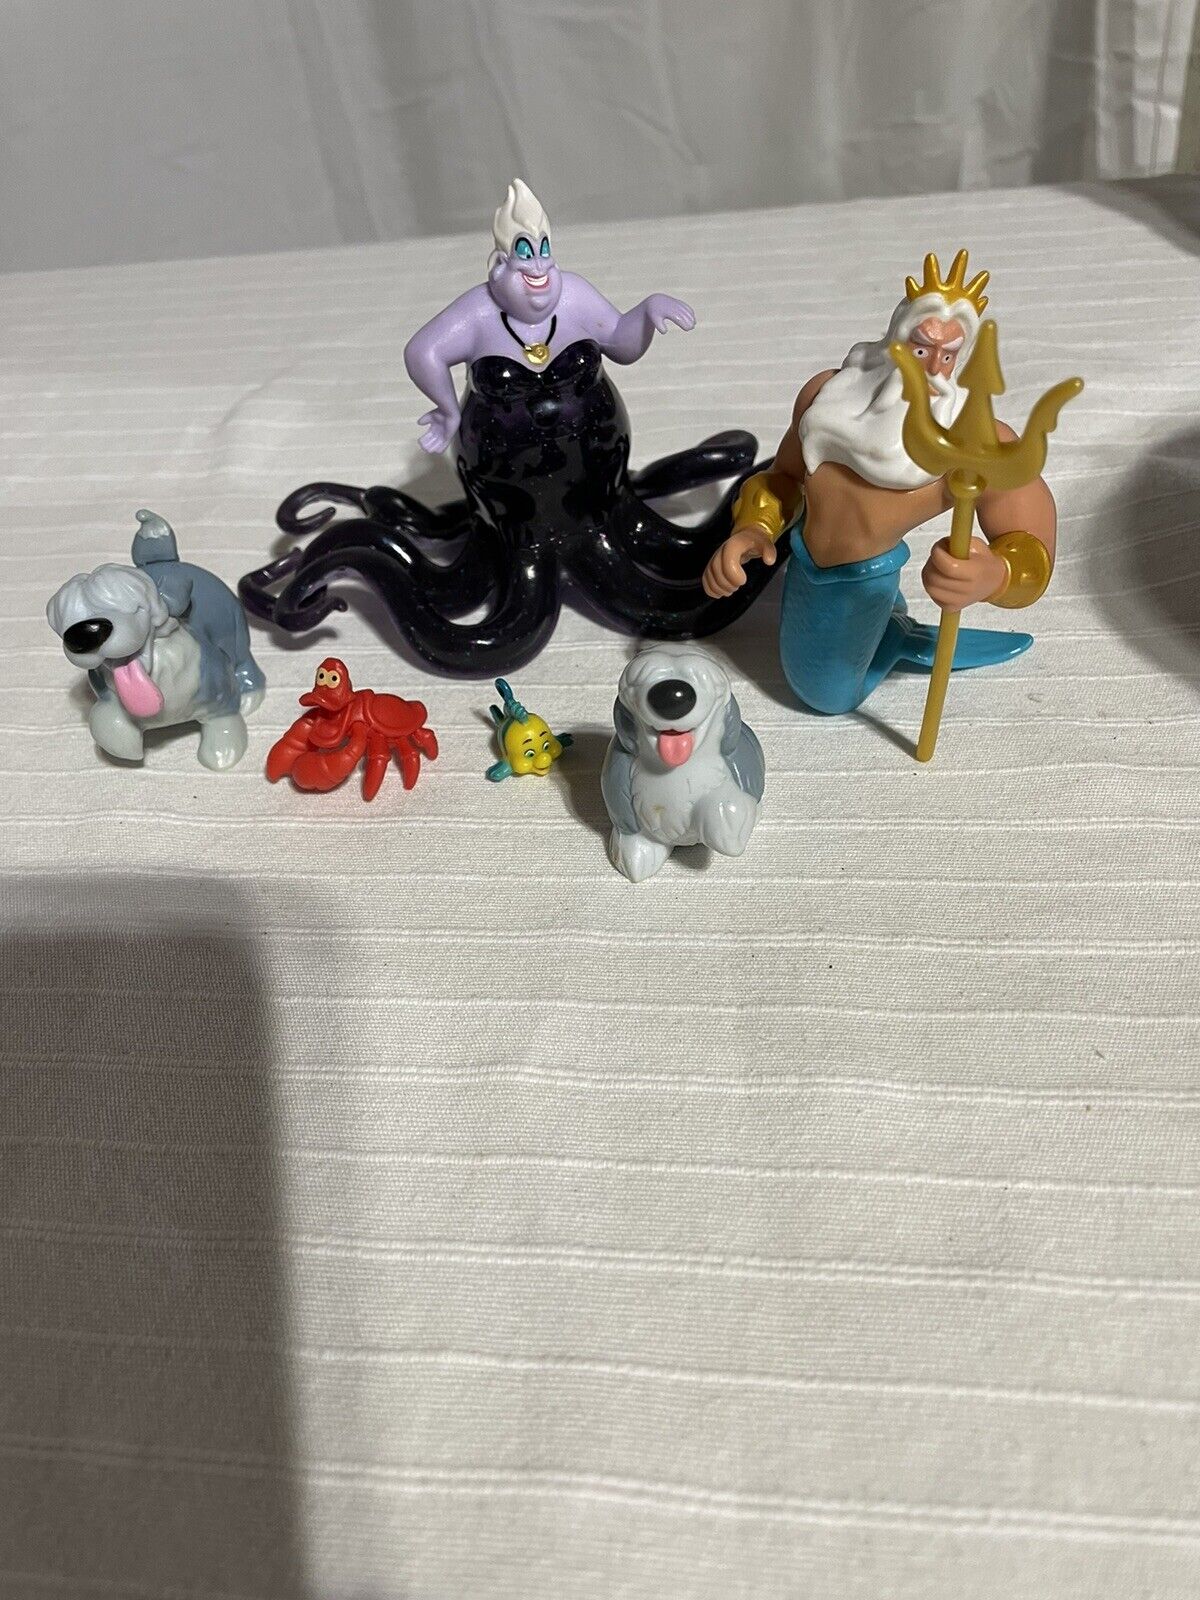 Lot of 6 Disney Little Mermaid Figures Toy Cake Toppers